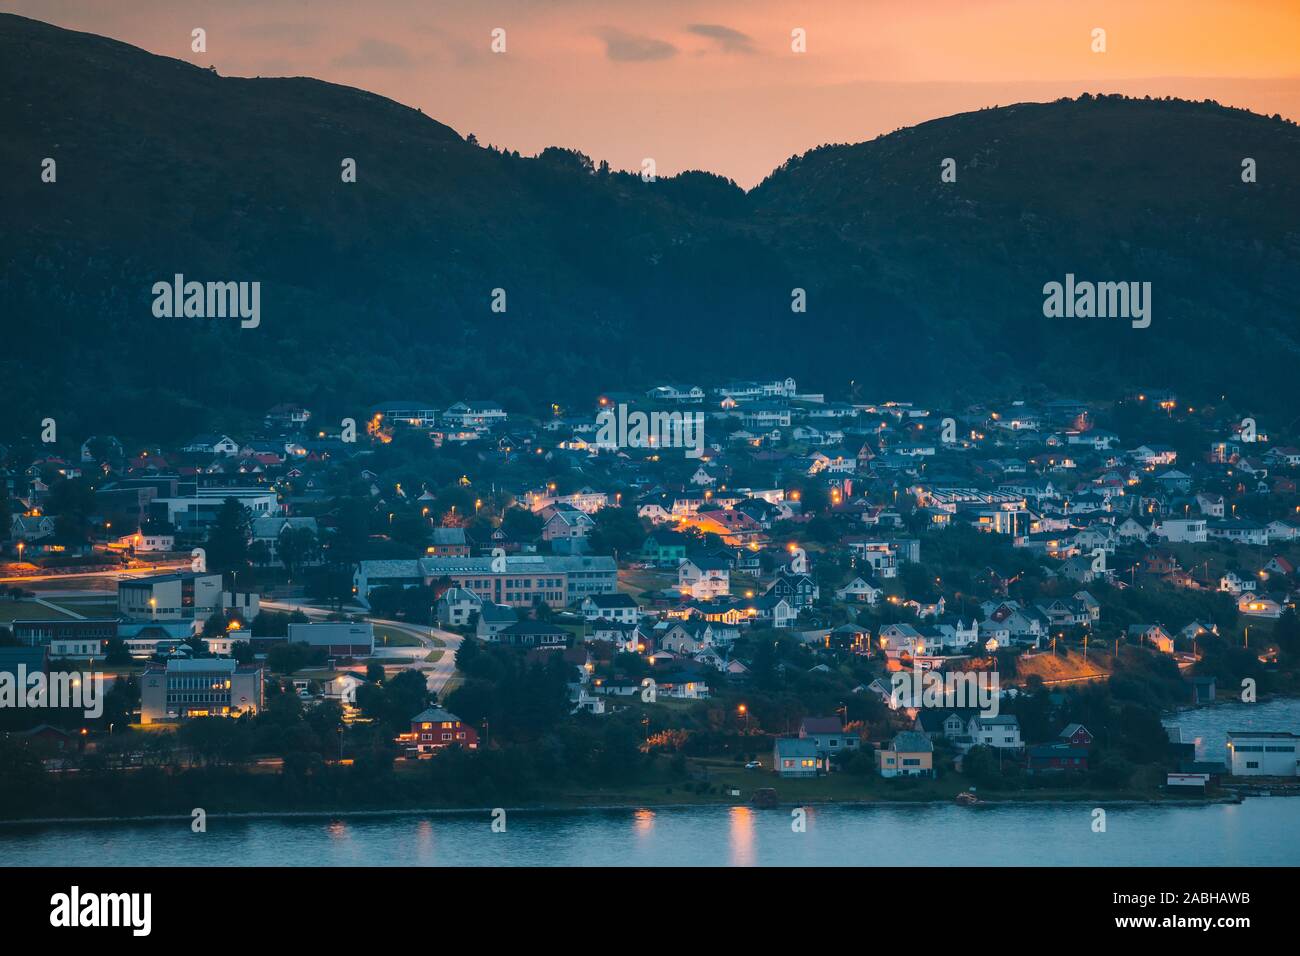 Alesund, Norway - June 21, 2019: Night View Of Residential Area In Alesund Skyline. Cityscape In Summer Morning. Stock Photo